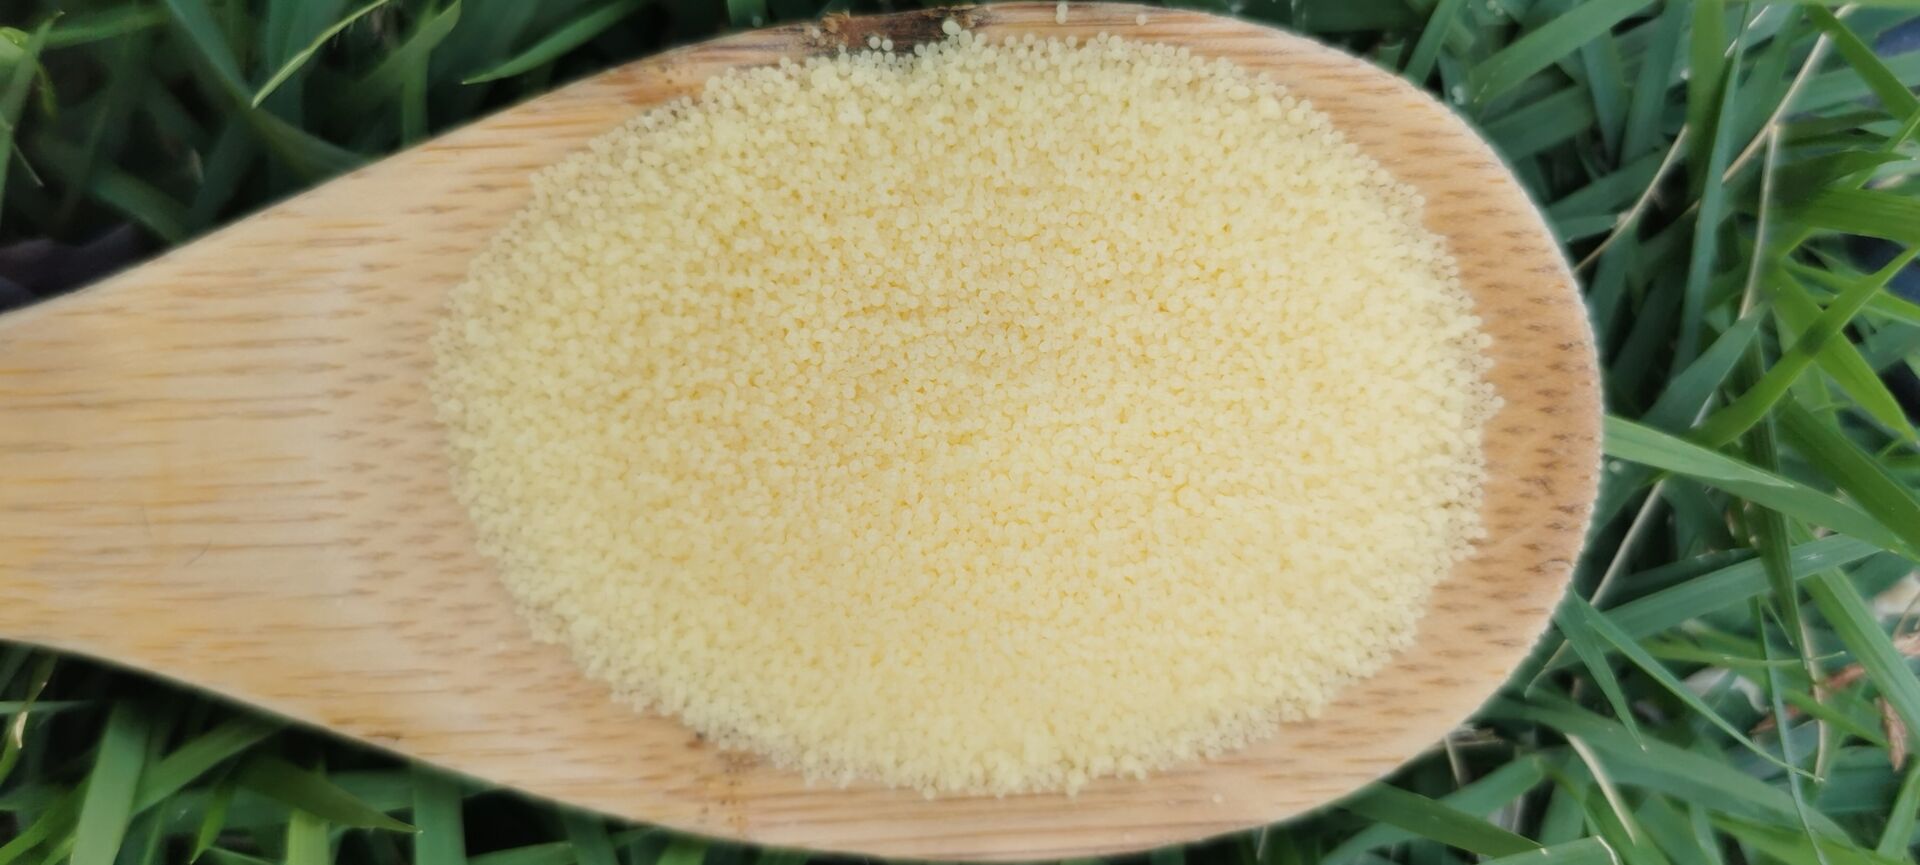 Candelila Wax Skin Benefits  See why we love this BOMB Ingredient